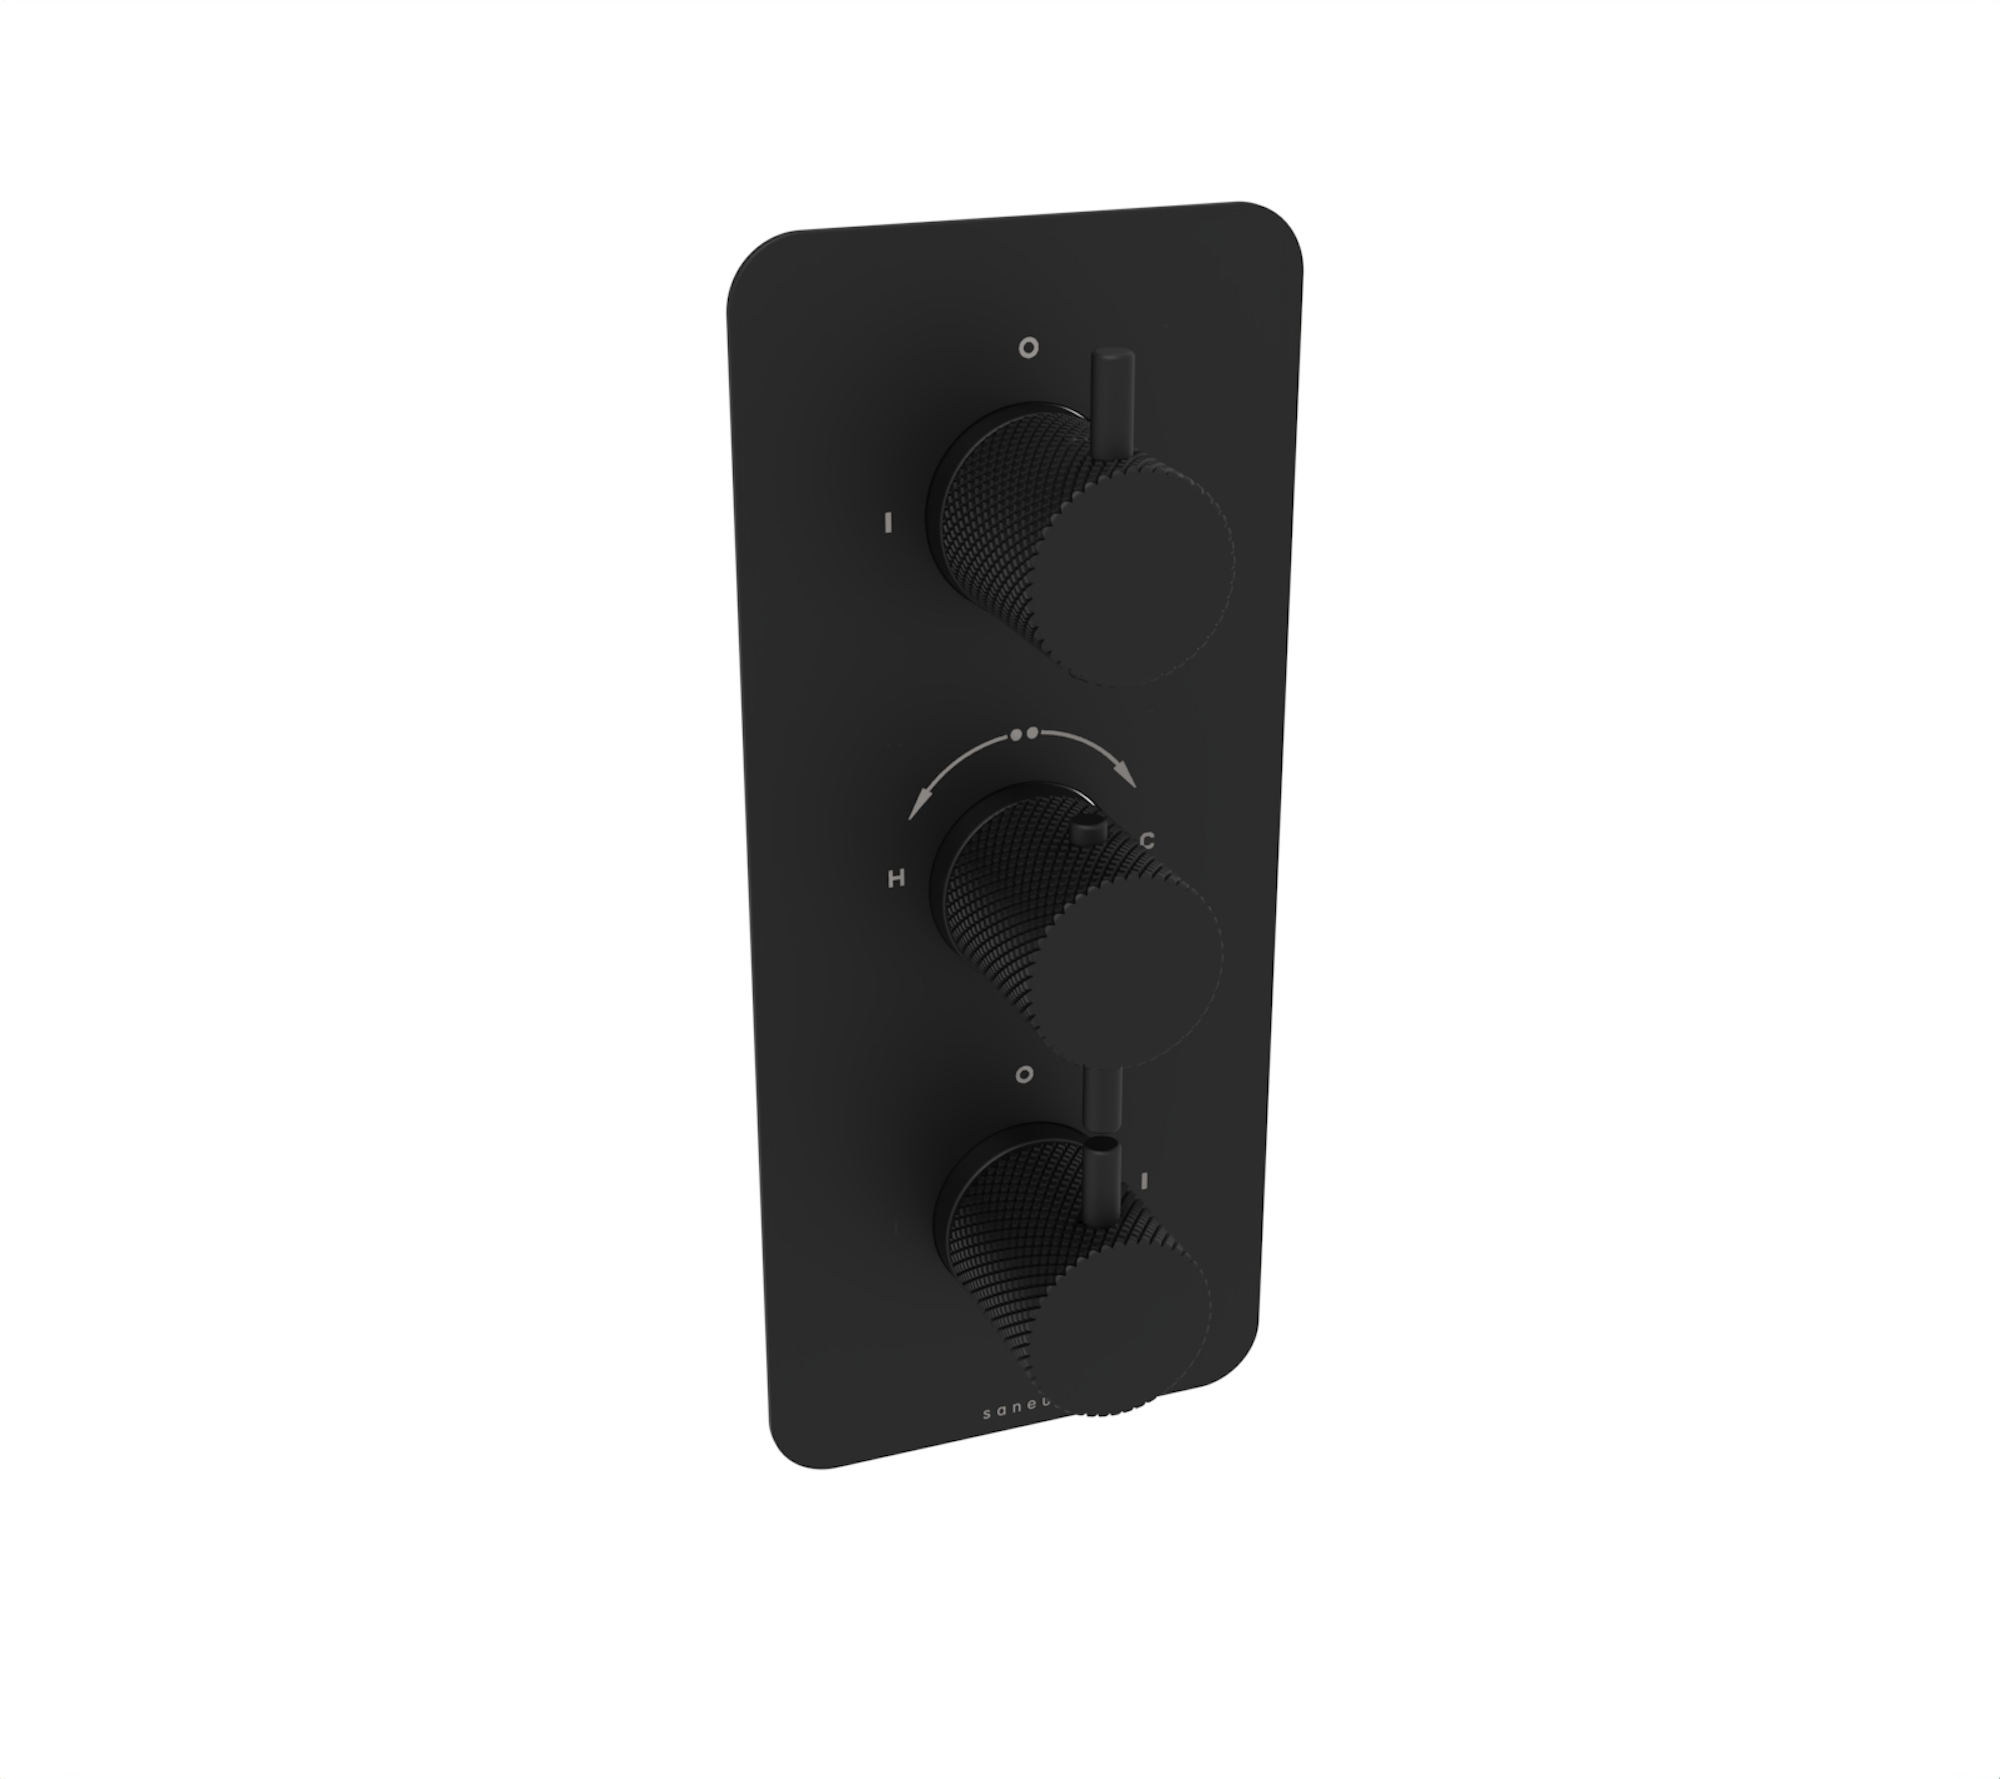 COS 3 way thermostatic shower valve kit with knurled handles - Matte Black